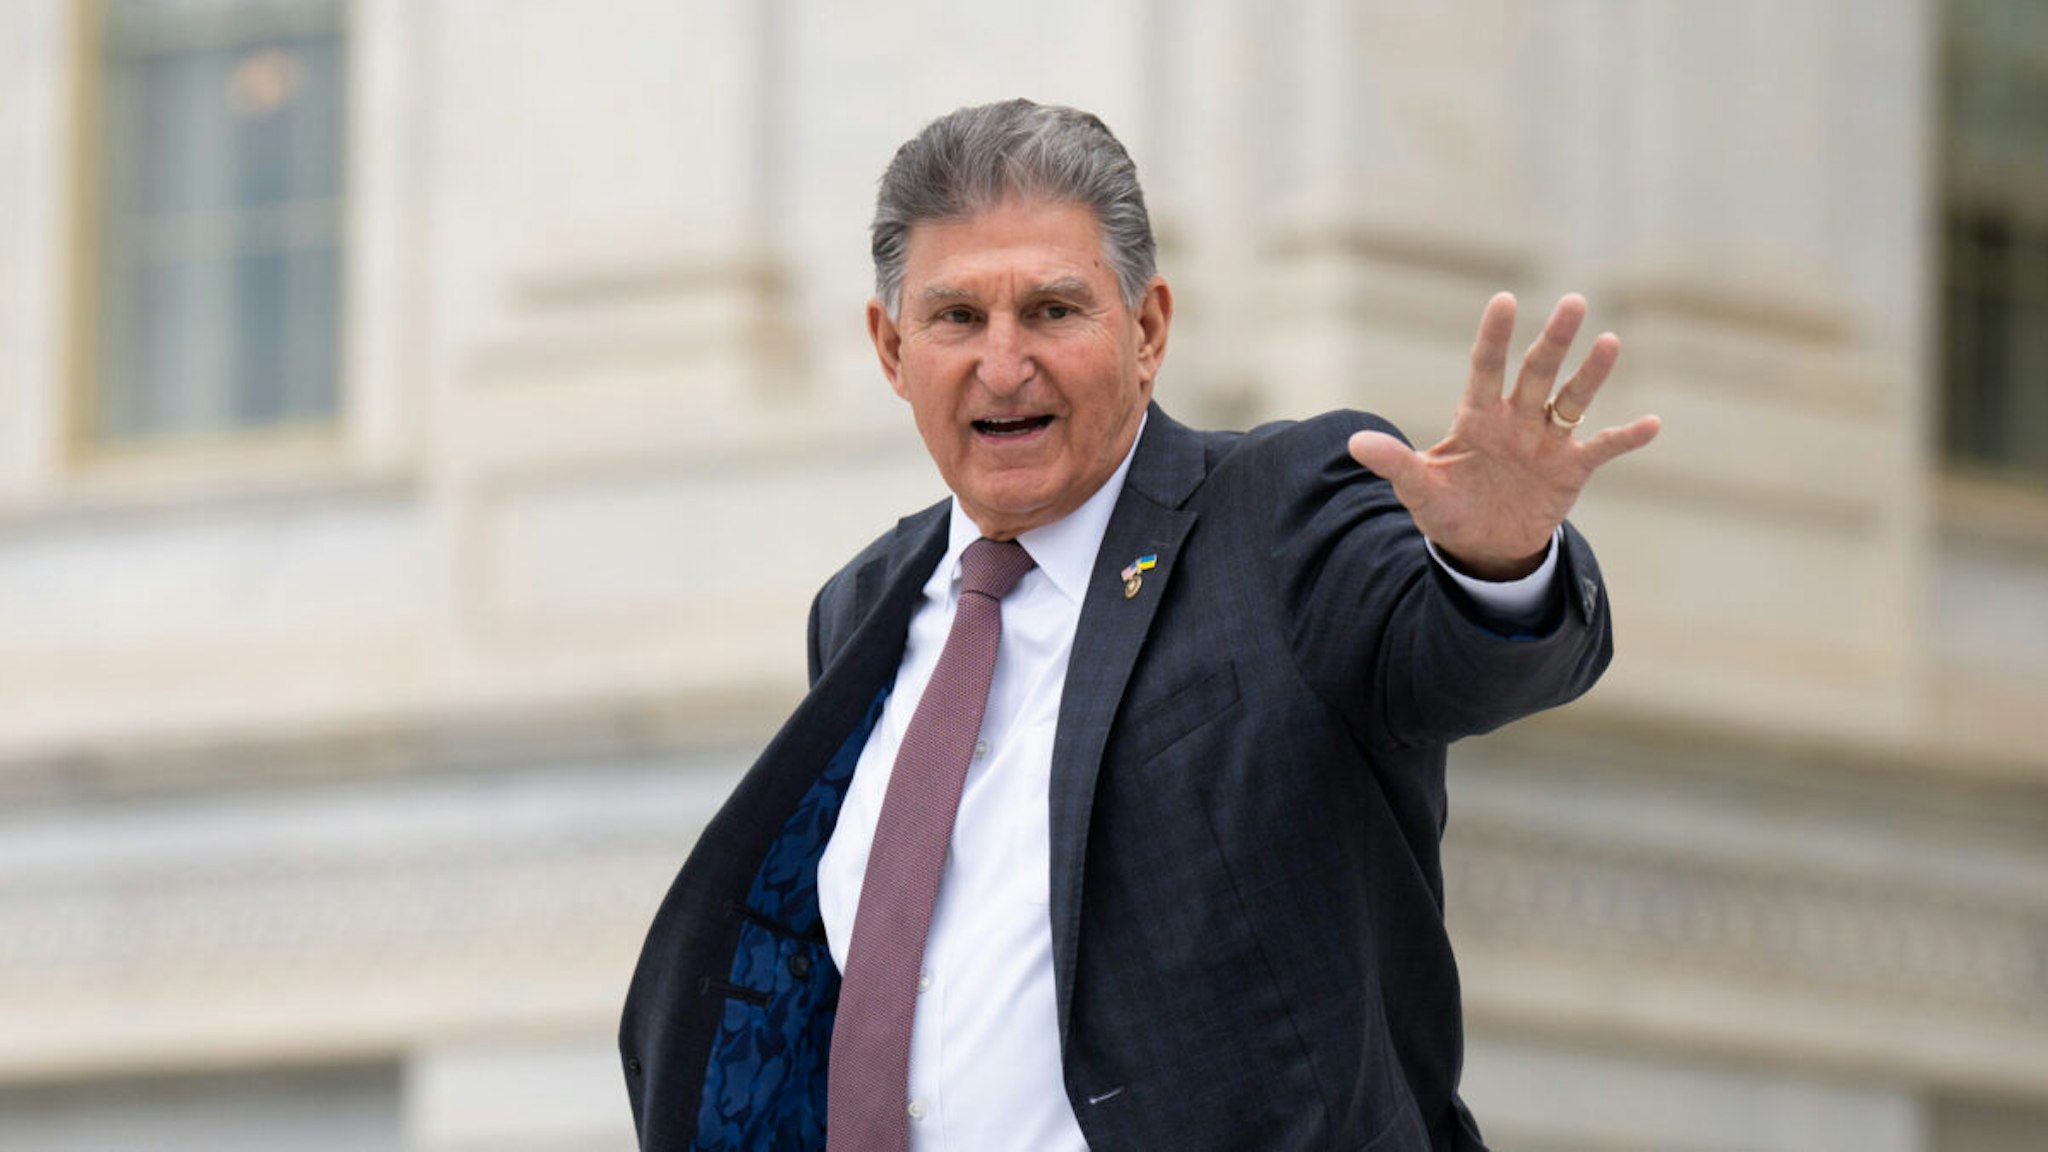 Sen. Joe Manchin, D-W. Va., waves to visitors on the Senate steps as he leaves the Capitol after the last vote of the week in Washington on Thurssday, May 4, 2023.